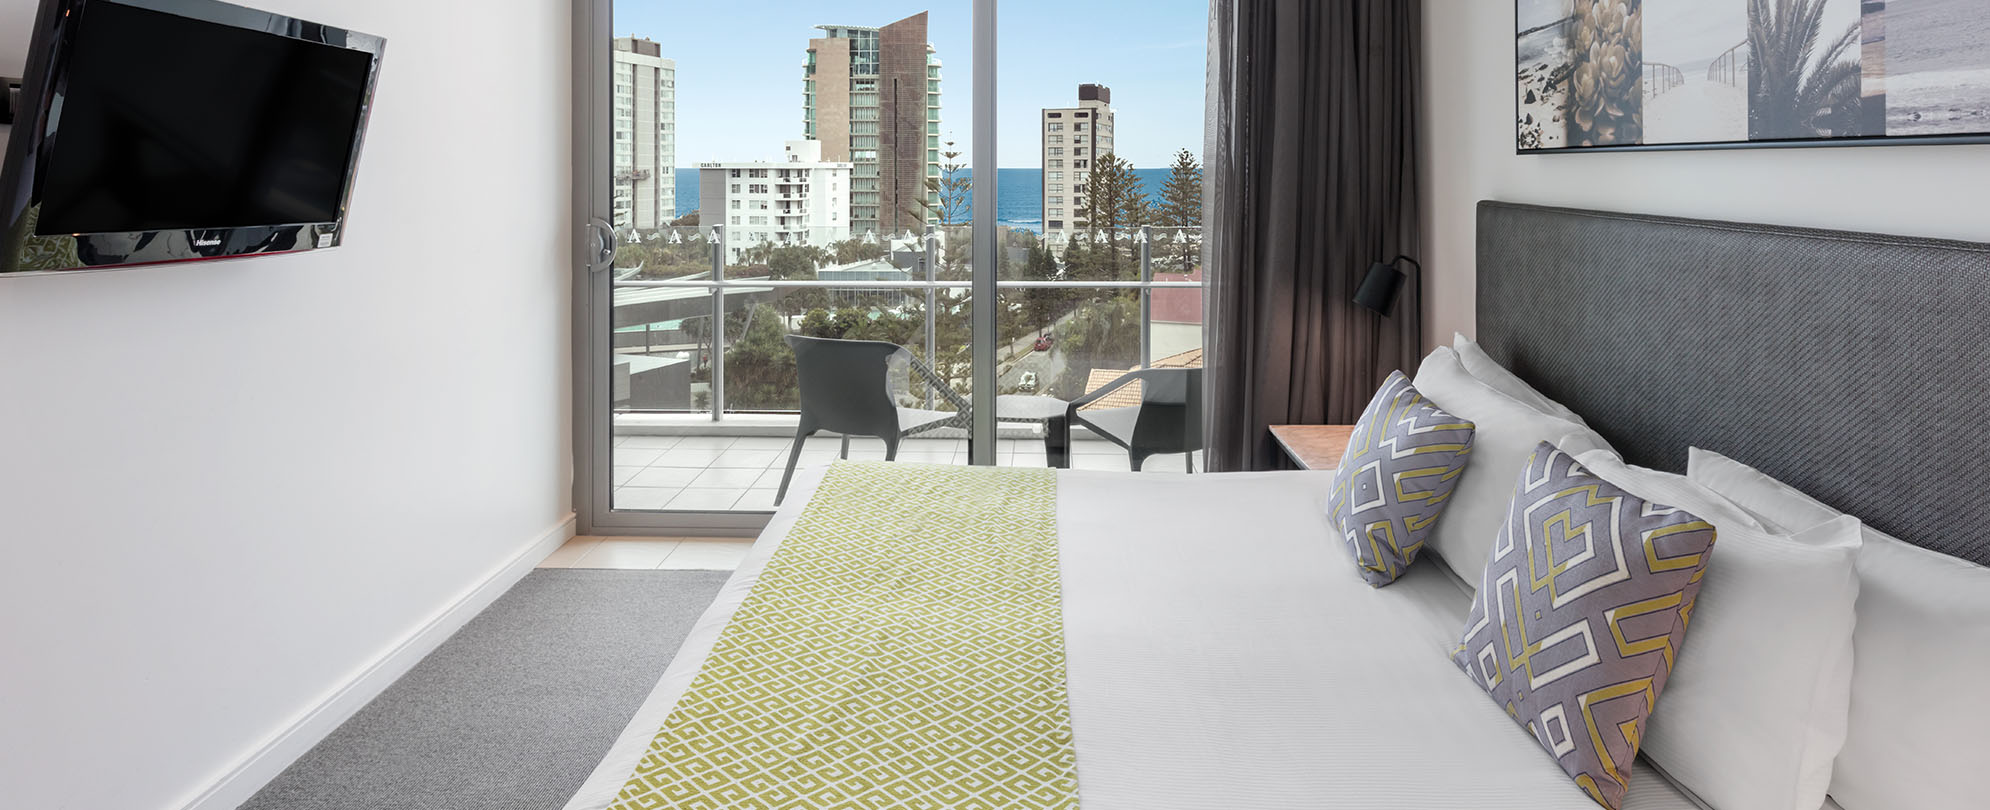 The master bedroom of a 2-bedroom suite at Club Wyndham Surfers Paradise.